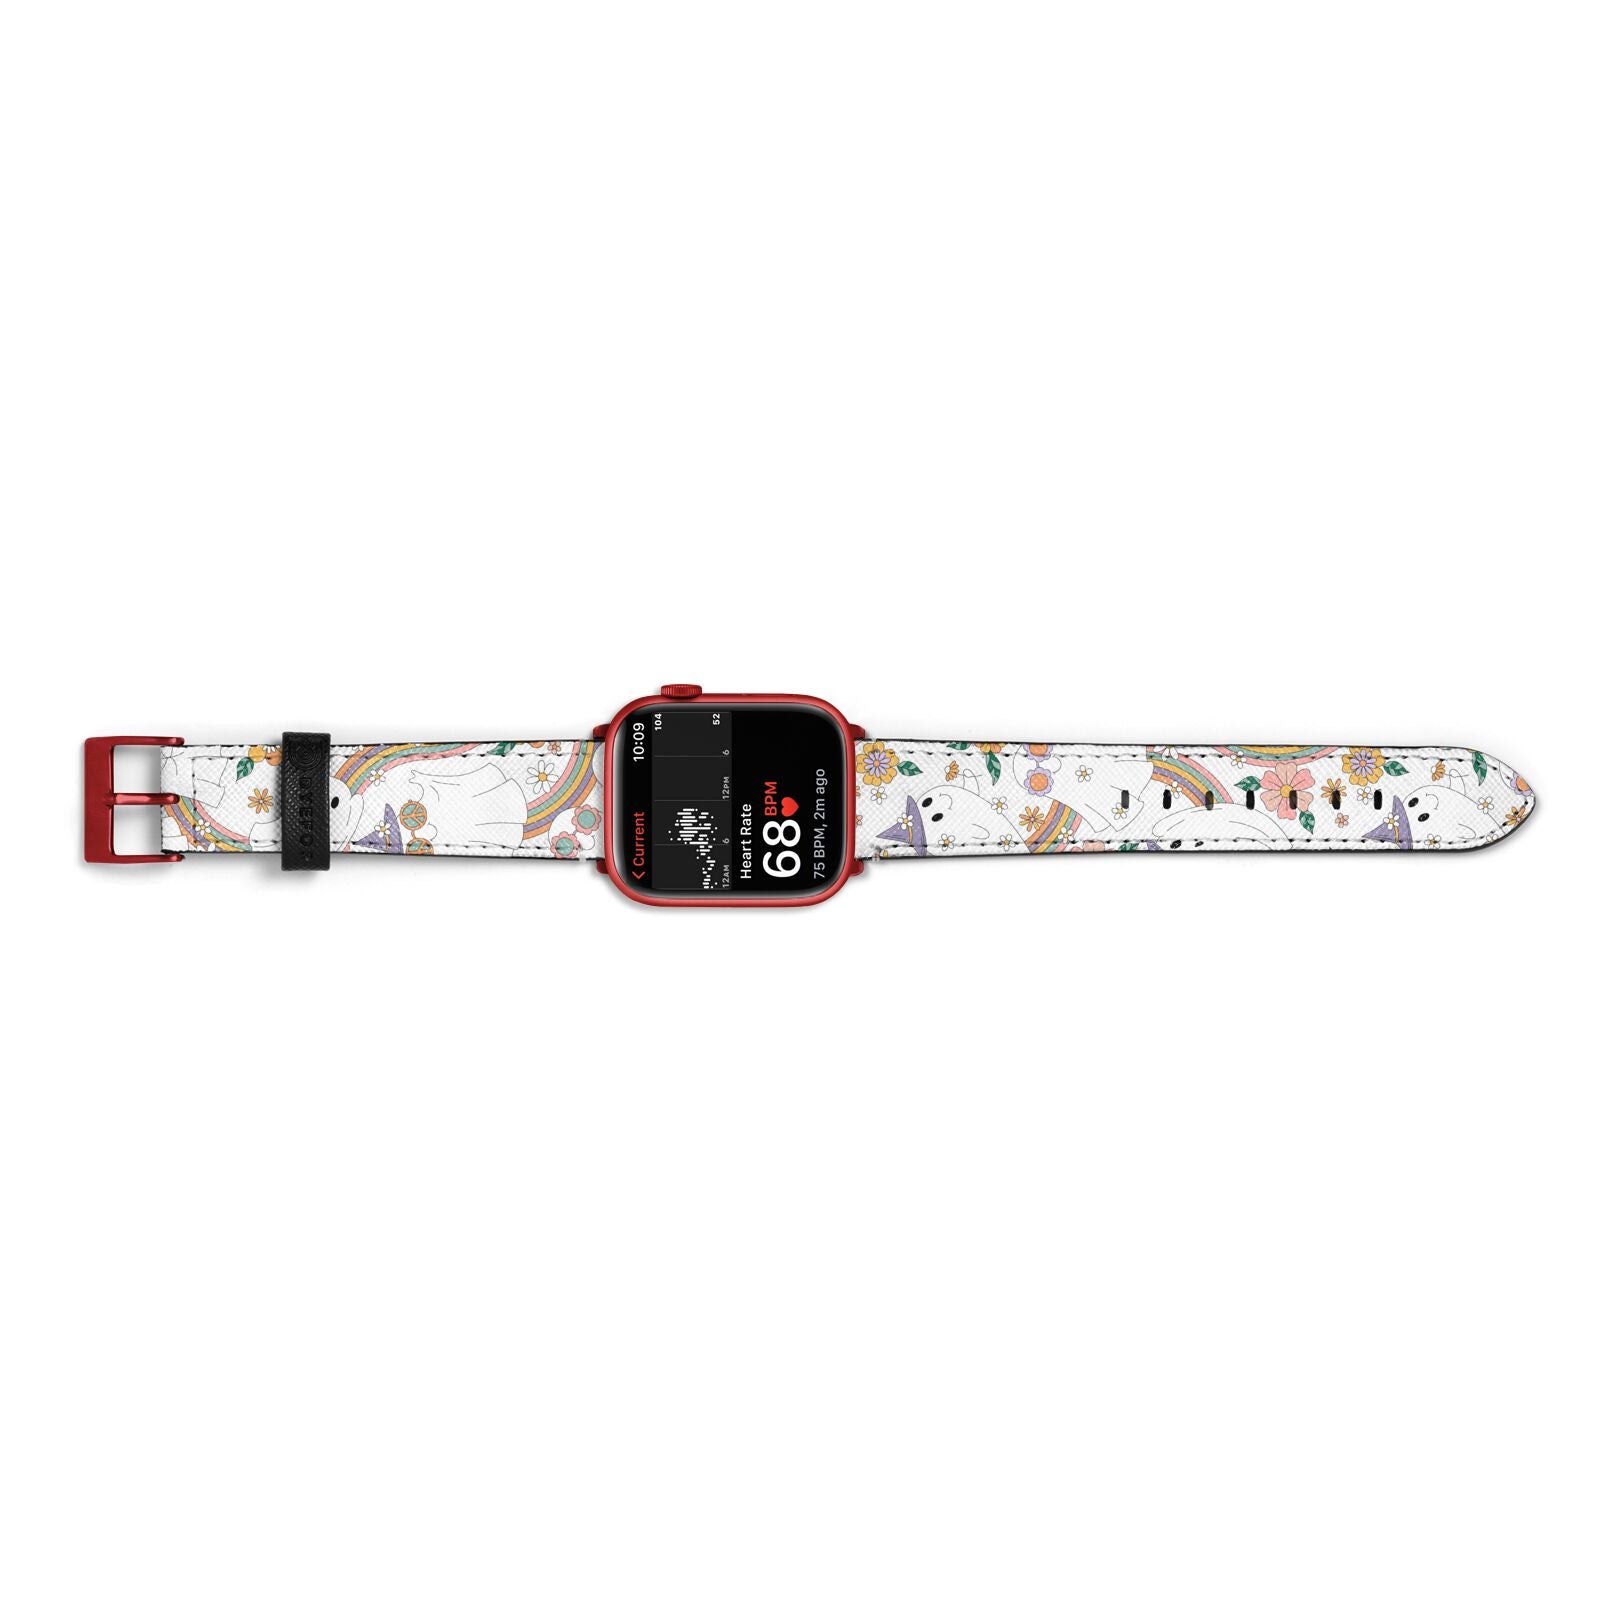 Rainbow Ghost Apple Watch Strap Size 38mm Landscape Image Red Hardware